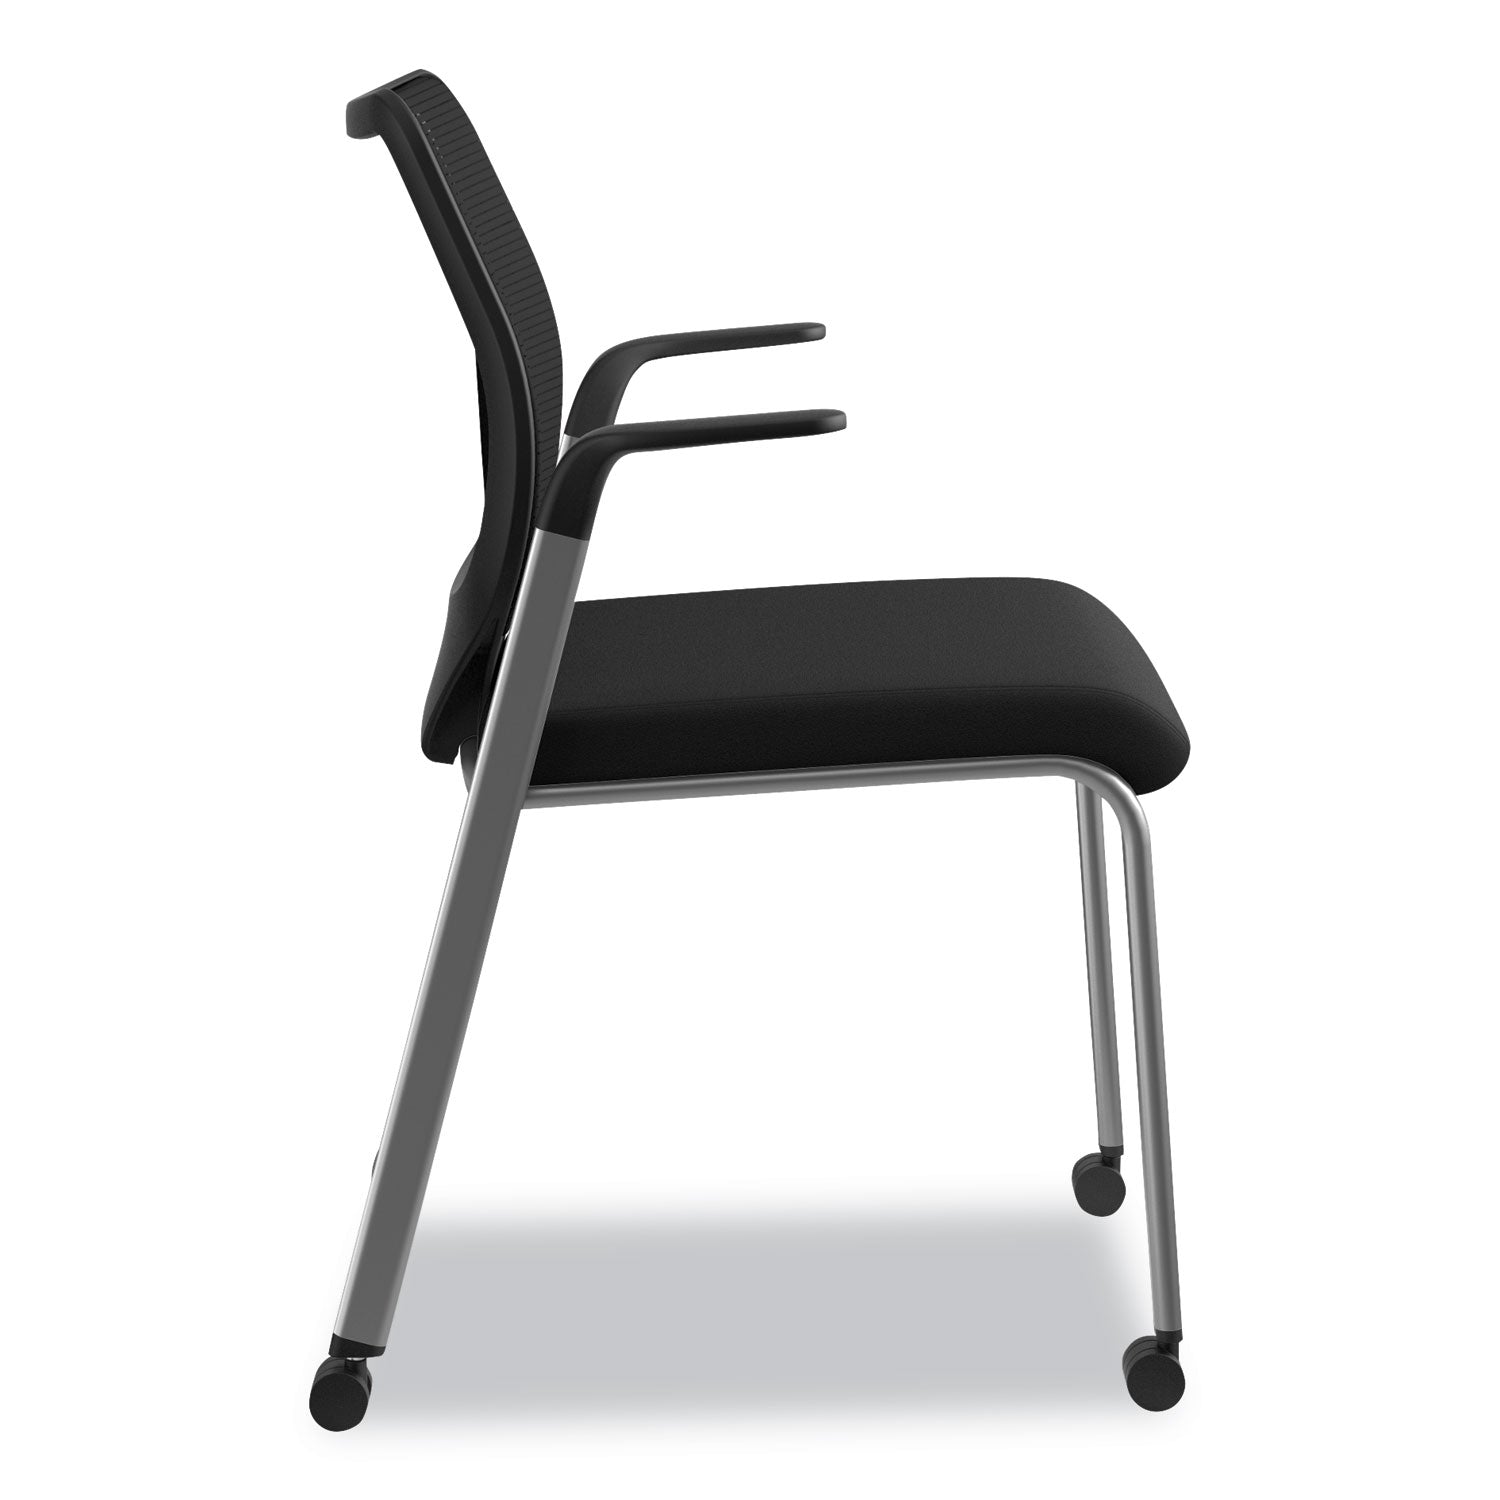 nucleus-series-multipurpose-stacking-chair-with-ilira-stretch-m4-back-supports-up-to-300-lb-black-seat-back-platinum-base_honn606hcu10t1 - 4